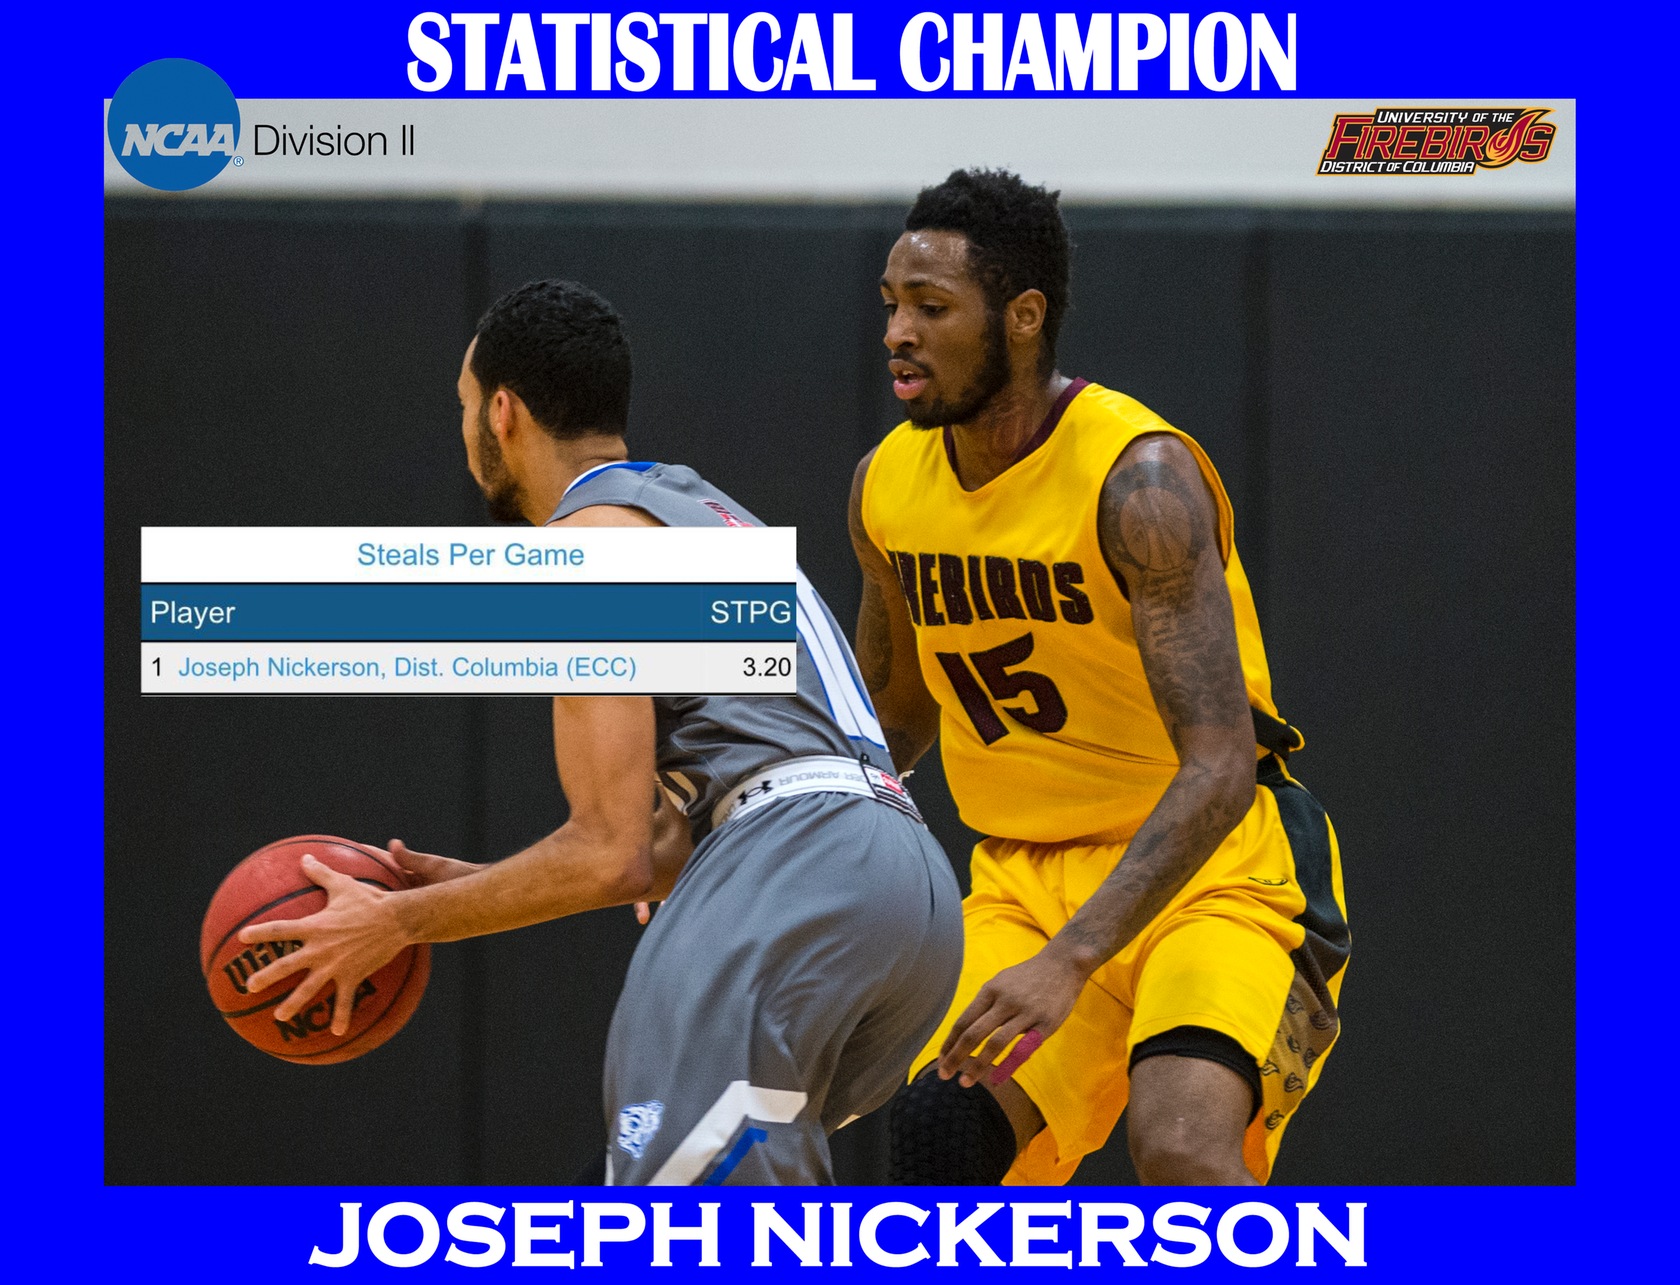 Joseph Nickerson Becomes UDC’s First Ever NCAA Division II Men’s Basketball Statistical Champion